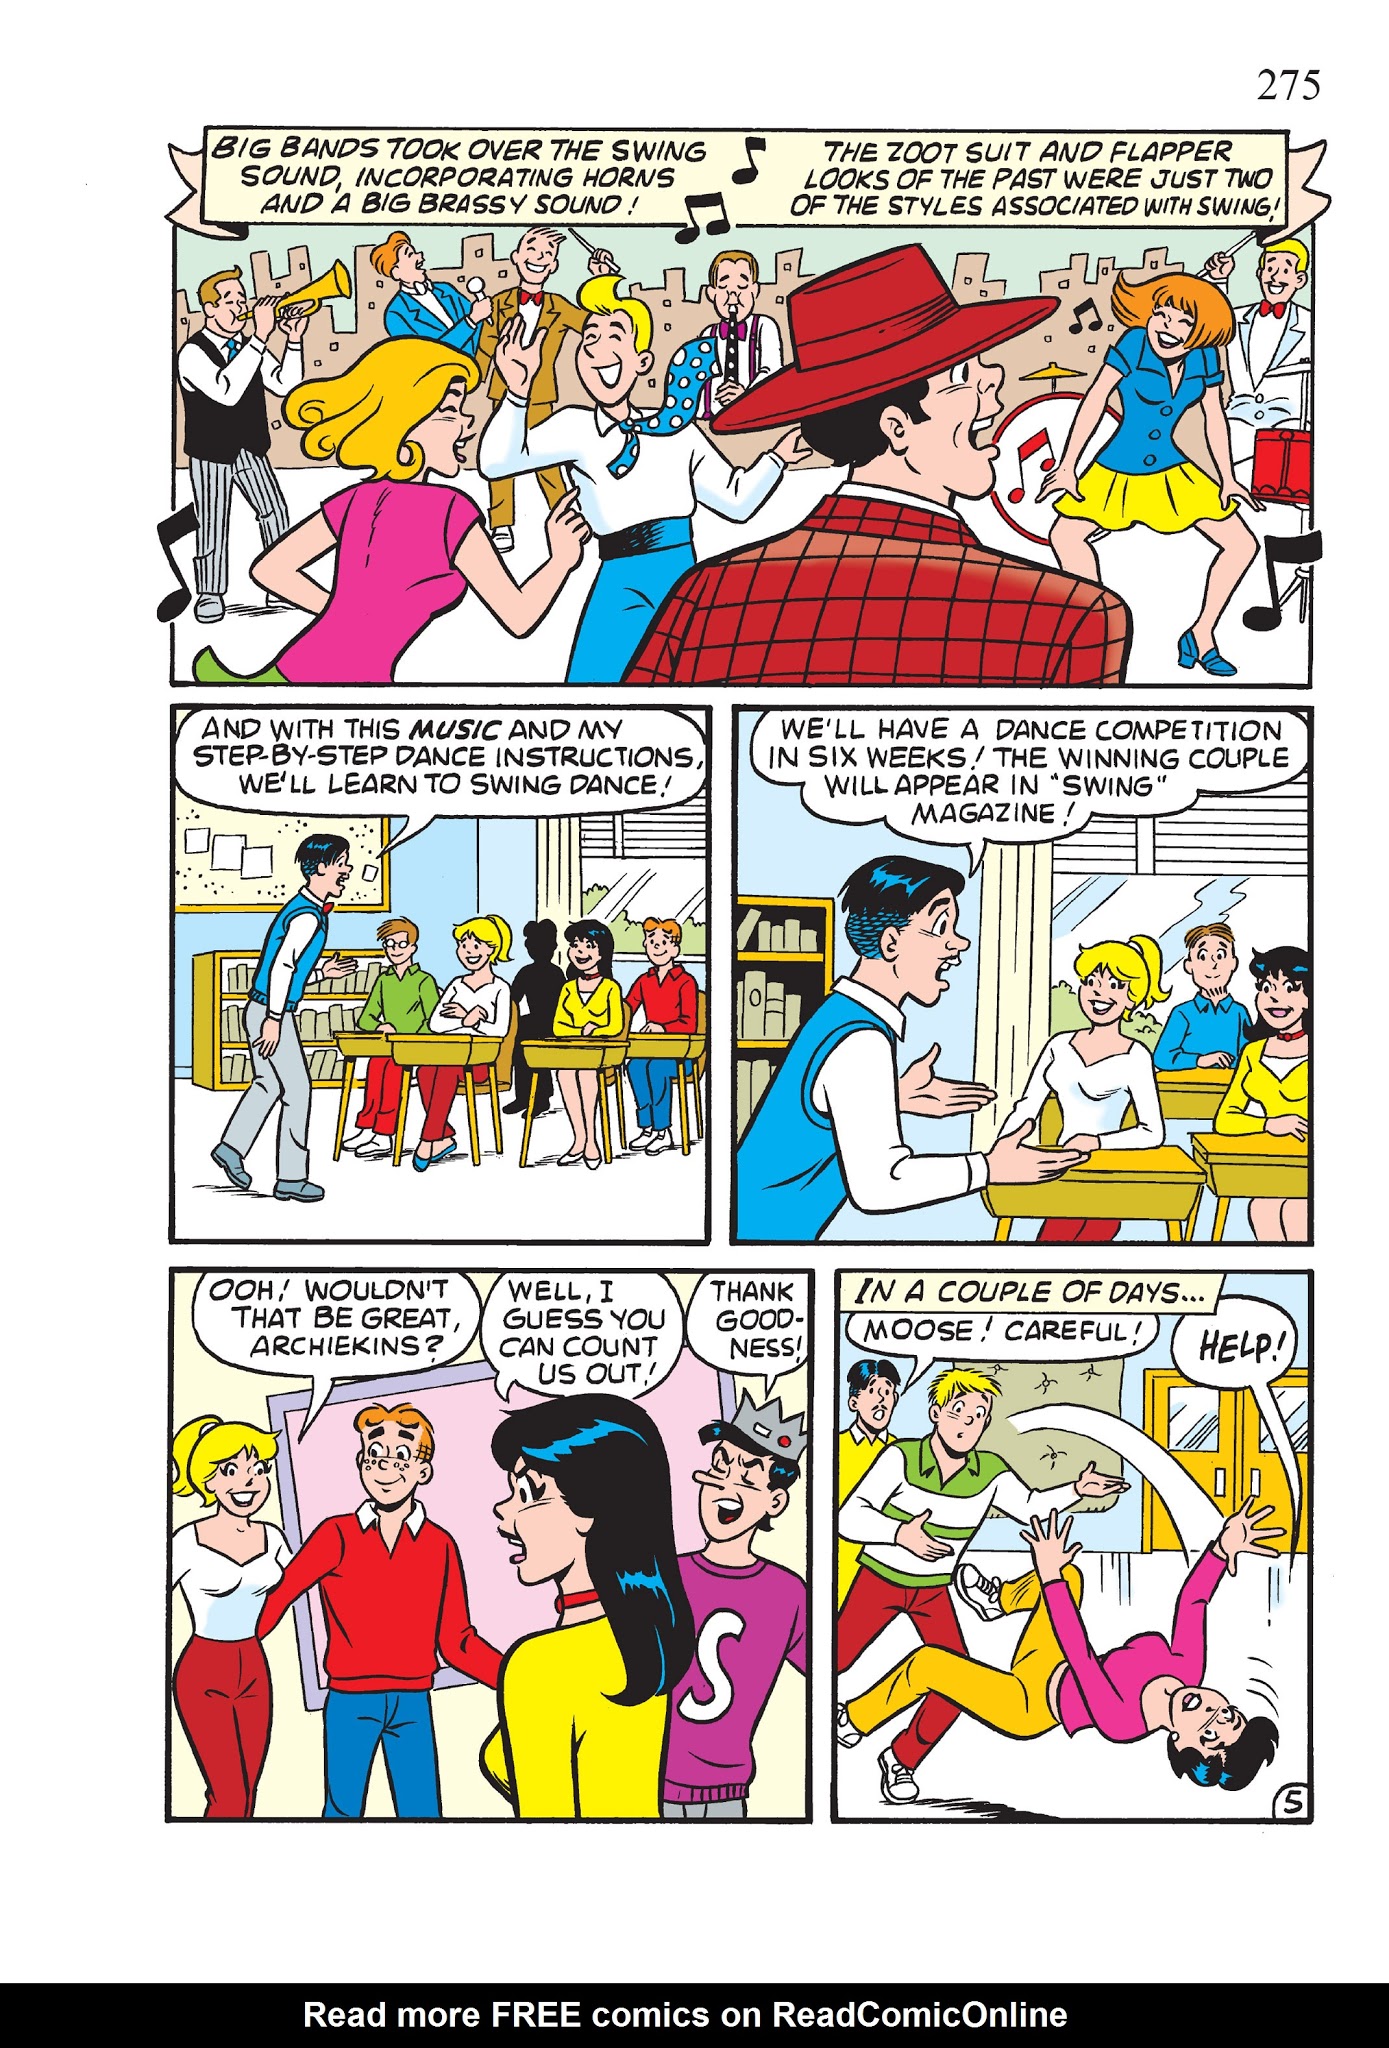 Read online The Best of Archie Comics: Betty & Veronica comic -  Issue # TPB - 276